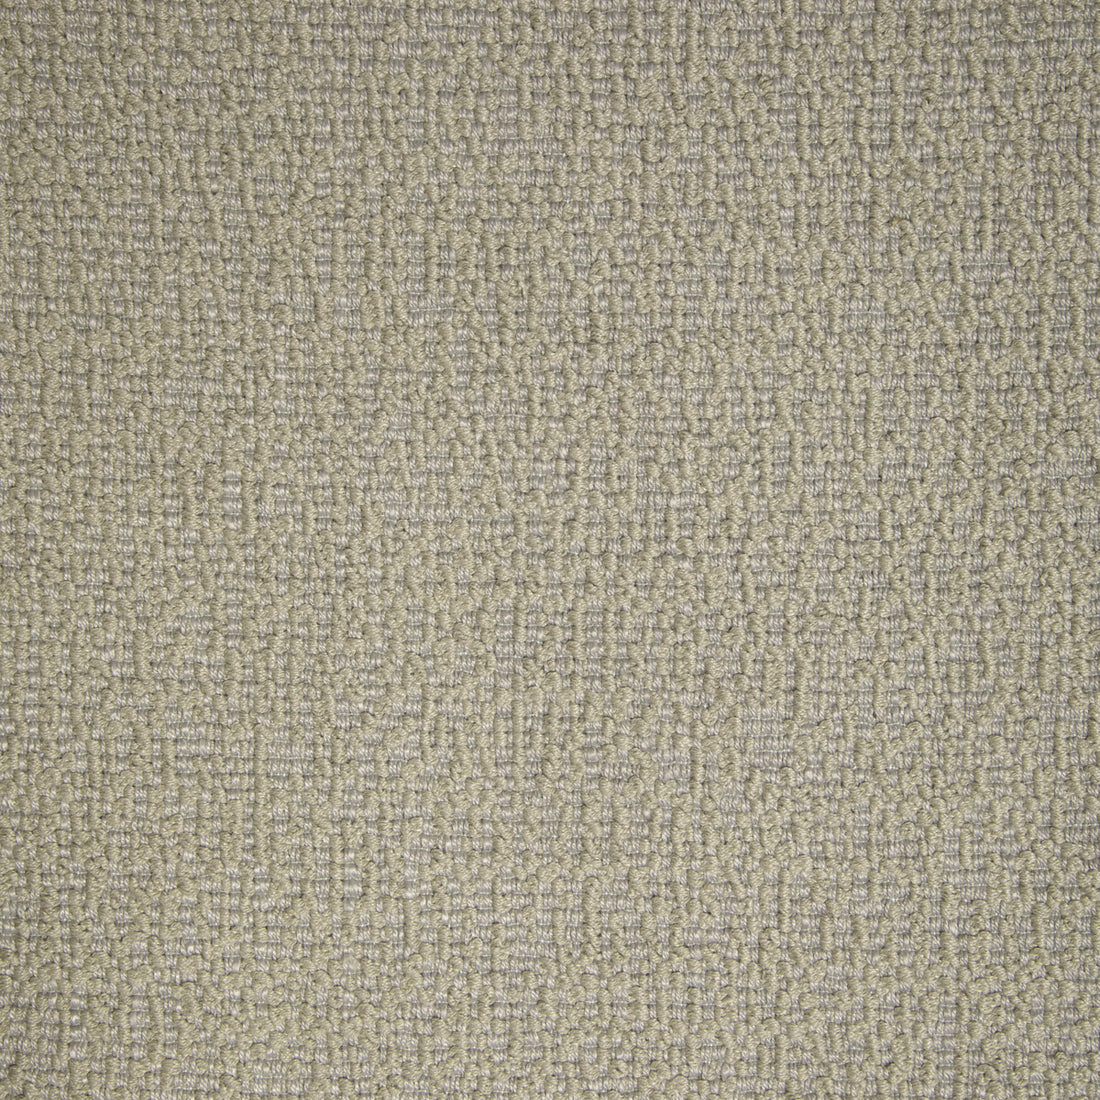 Kravet Design fabric in 36886-106 color - pattern 36886.106.0 - by Kravet Design in the Inside Out Performance Fabrics collection